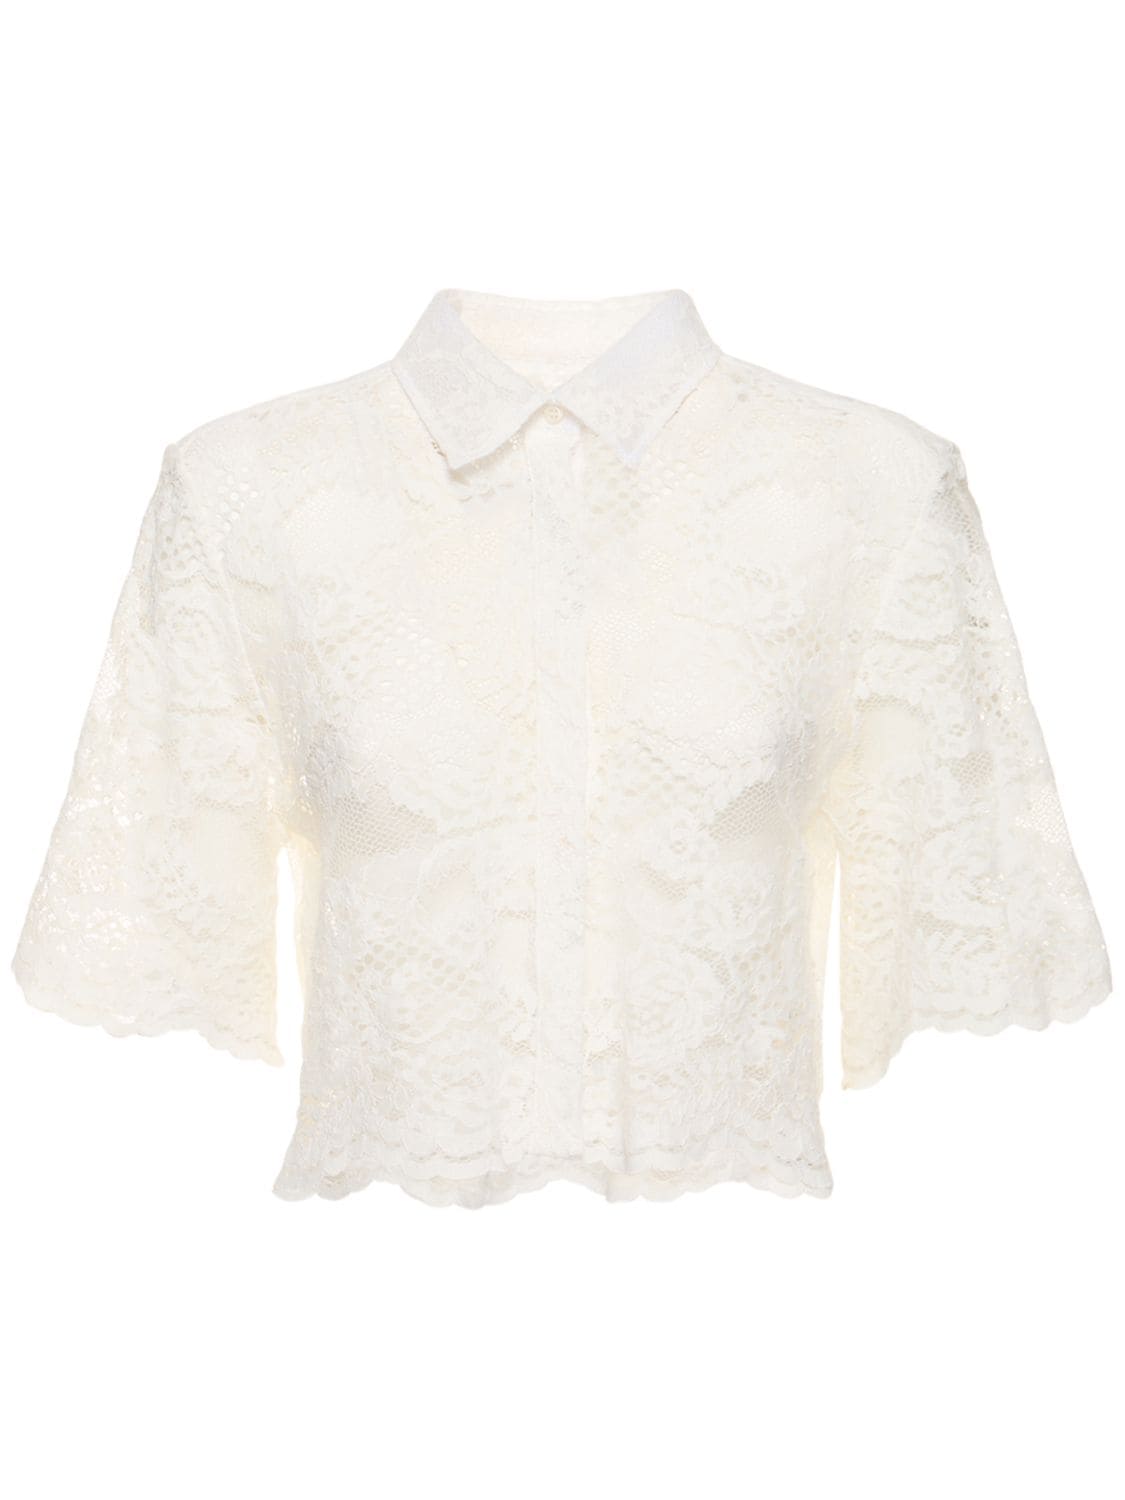 Msgm Cropped Lace Shirt In White